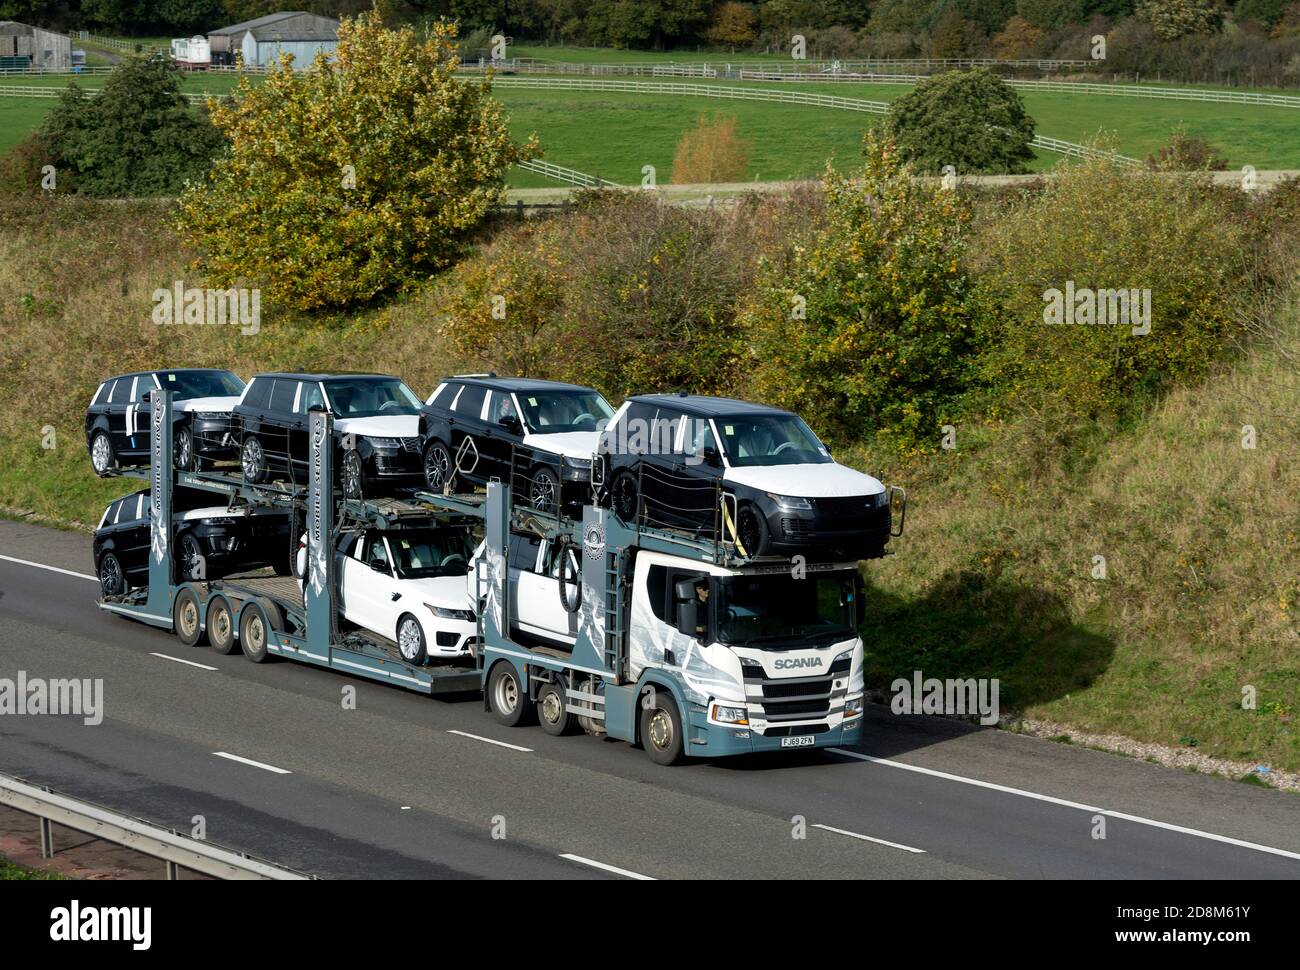 Mobile Services Scania transporter lorry carrying new Land Rover cars on the M40 motorway, Warwickshire, UK Stock Photo